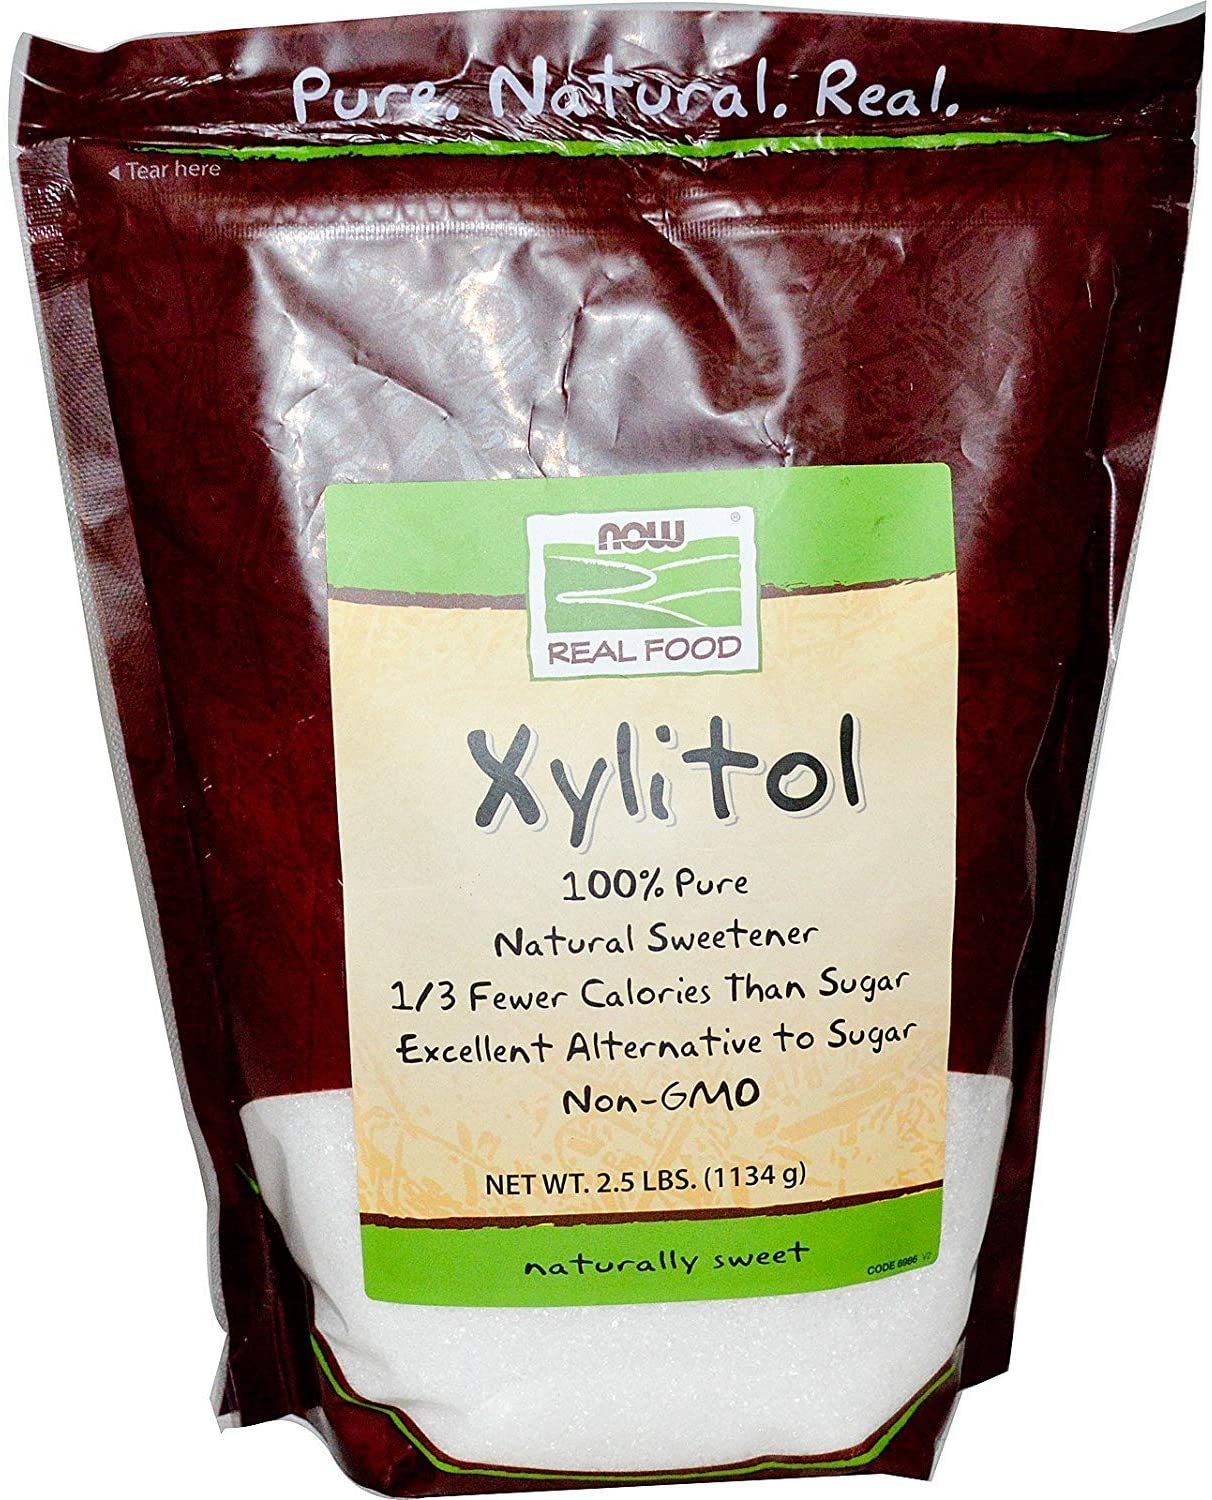 On Xylitol for Oral Hygiene